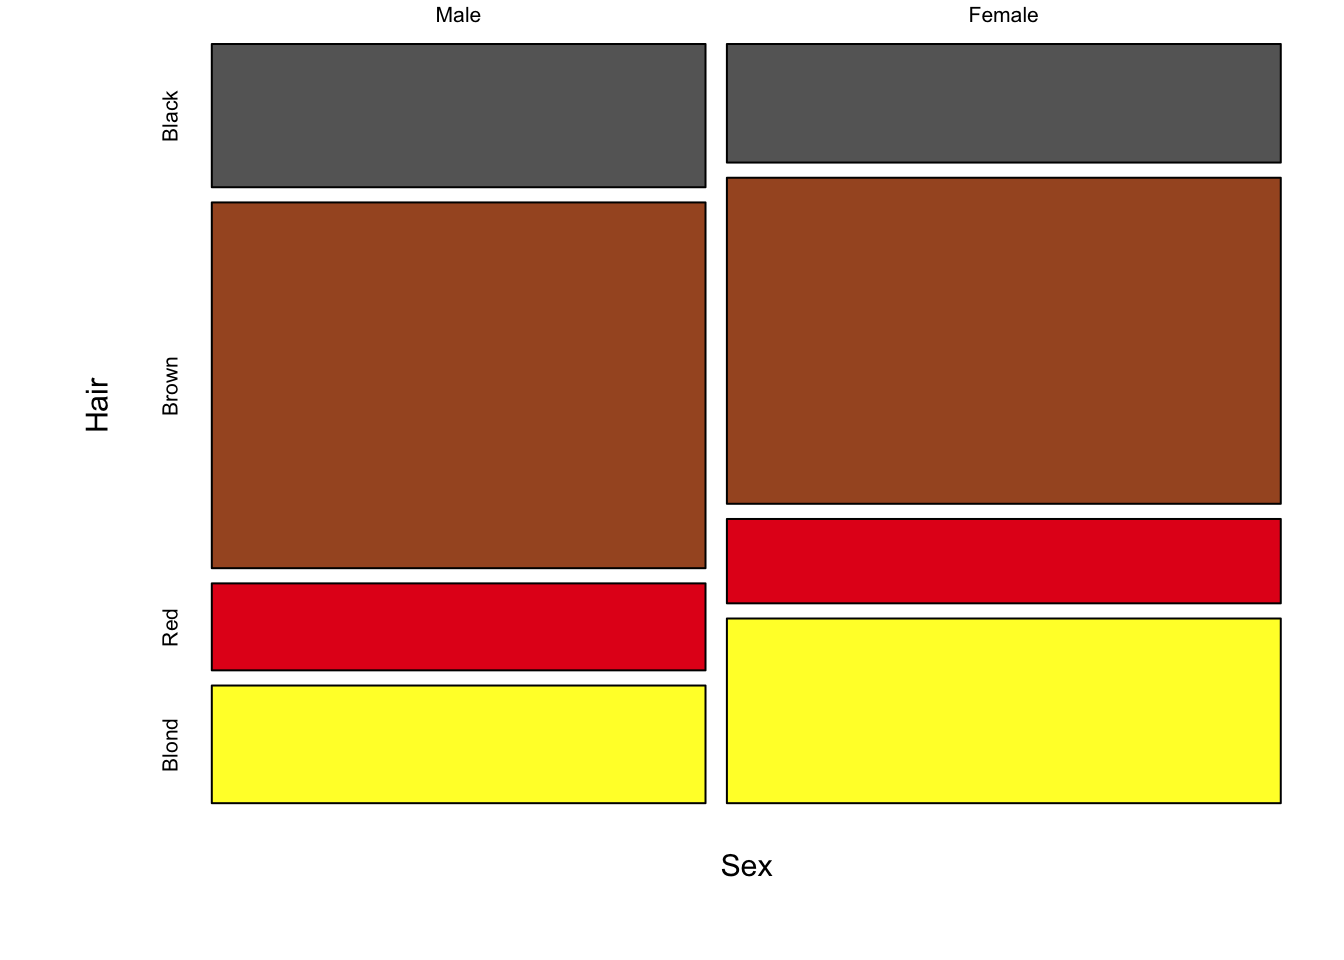 Three mosaic plots for all pair-wise combinations of three variables (hair colour, eye colour and sex) is an extension of stacked bar charts. Note the loss of a scale, since each axis adds up to 100\% of the data, area is equivalent to size of the group.